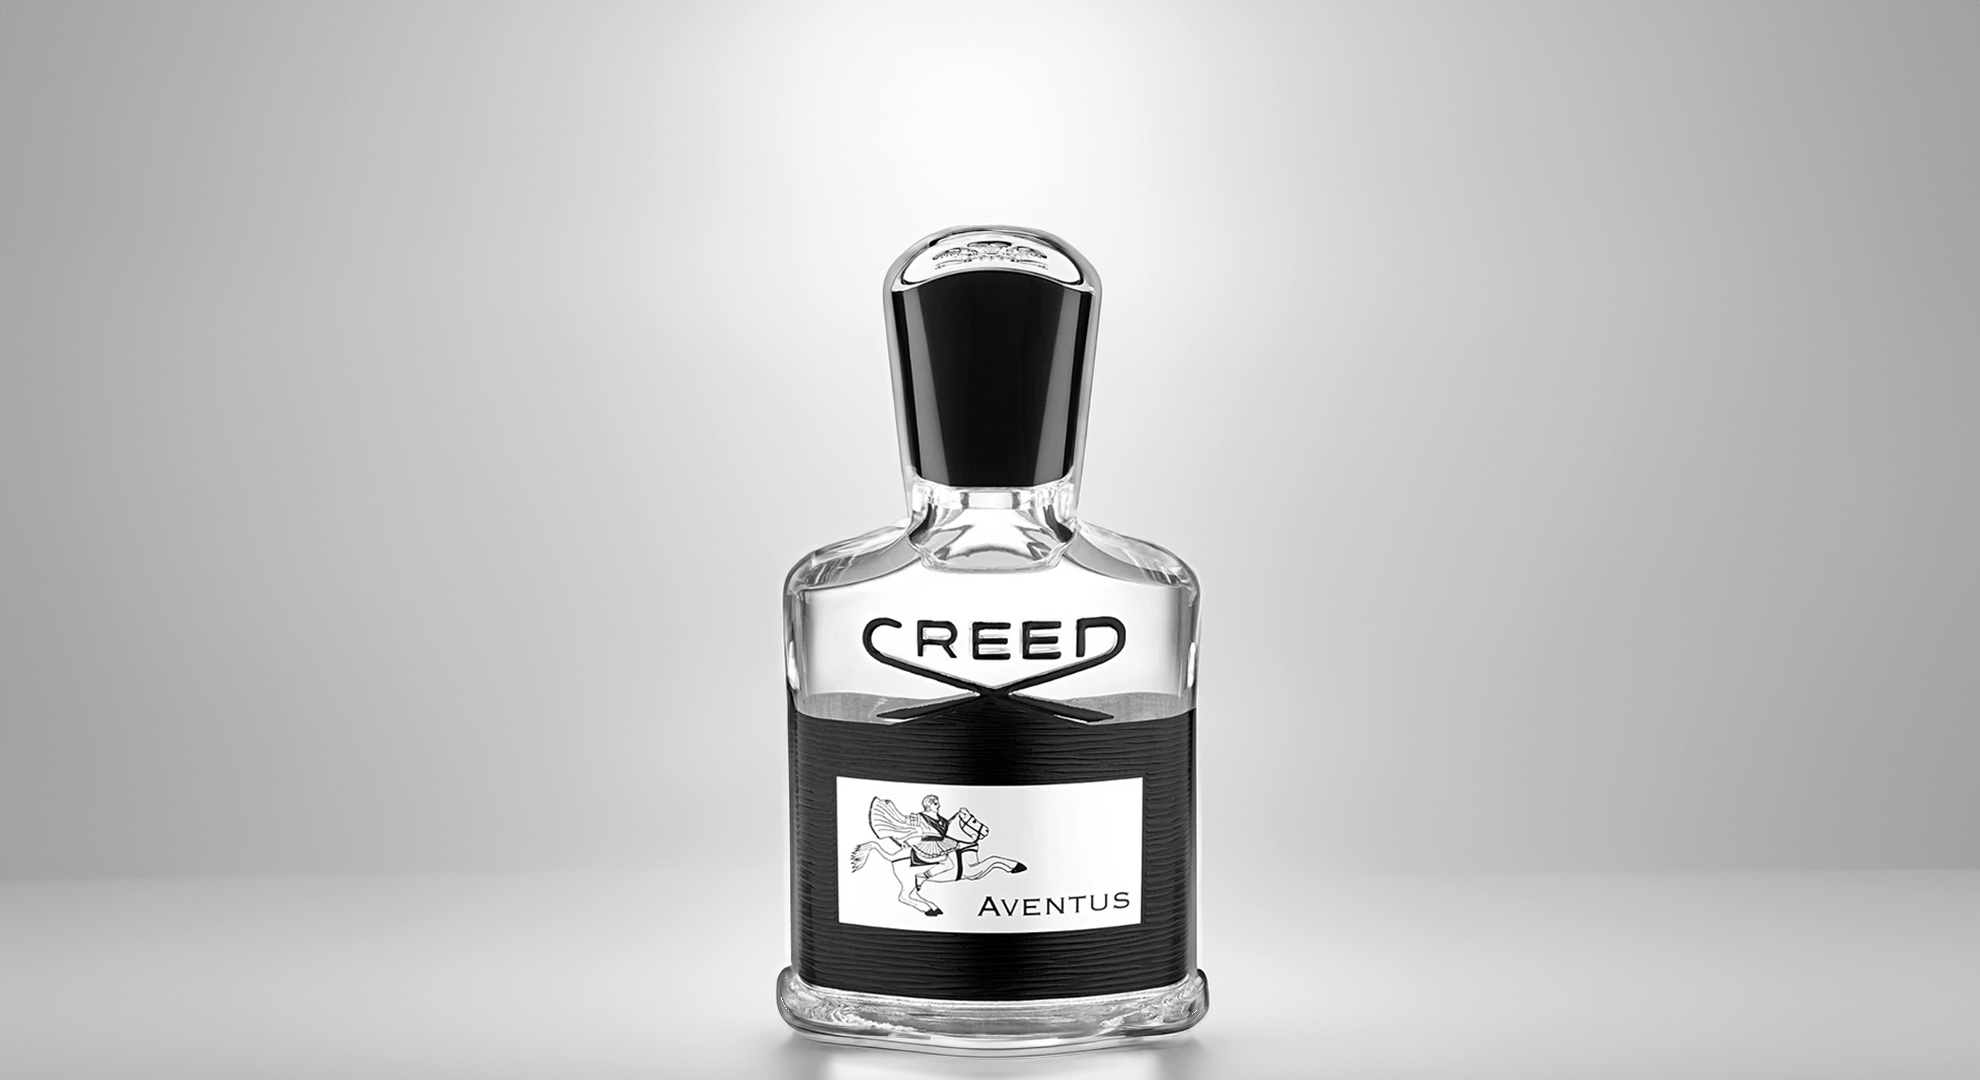 Aventus by Creed: The Scent of Legacy and Innovation